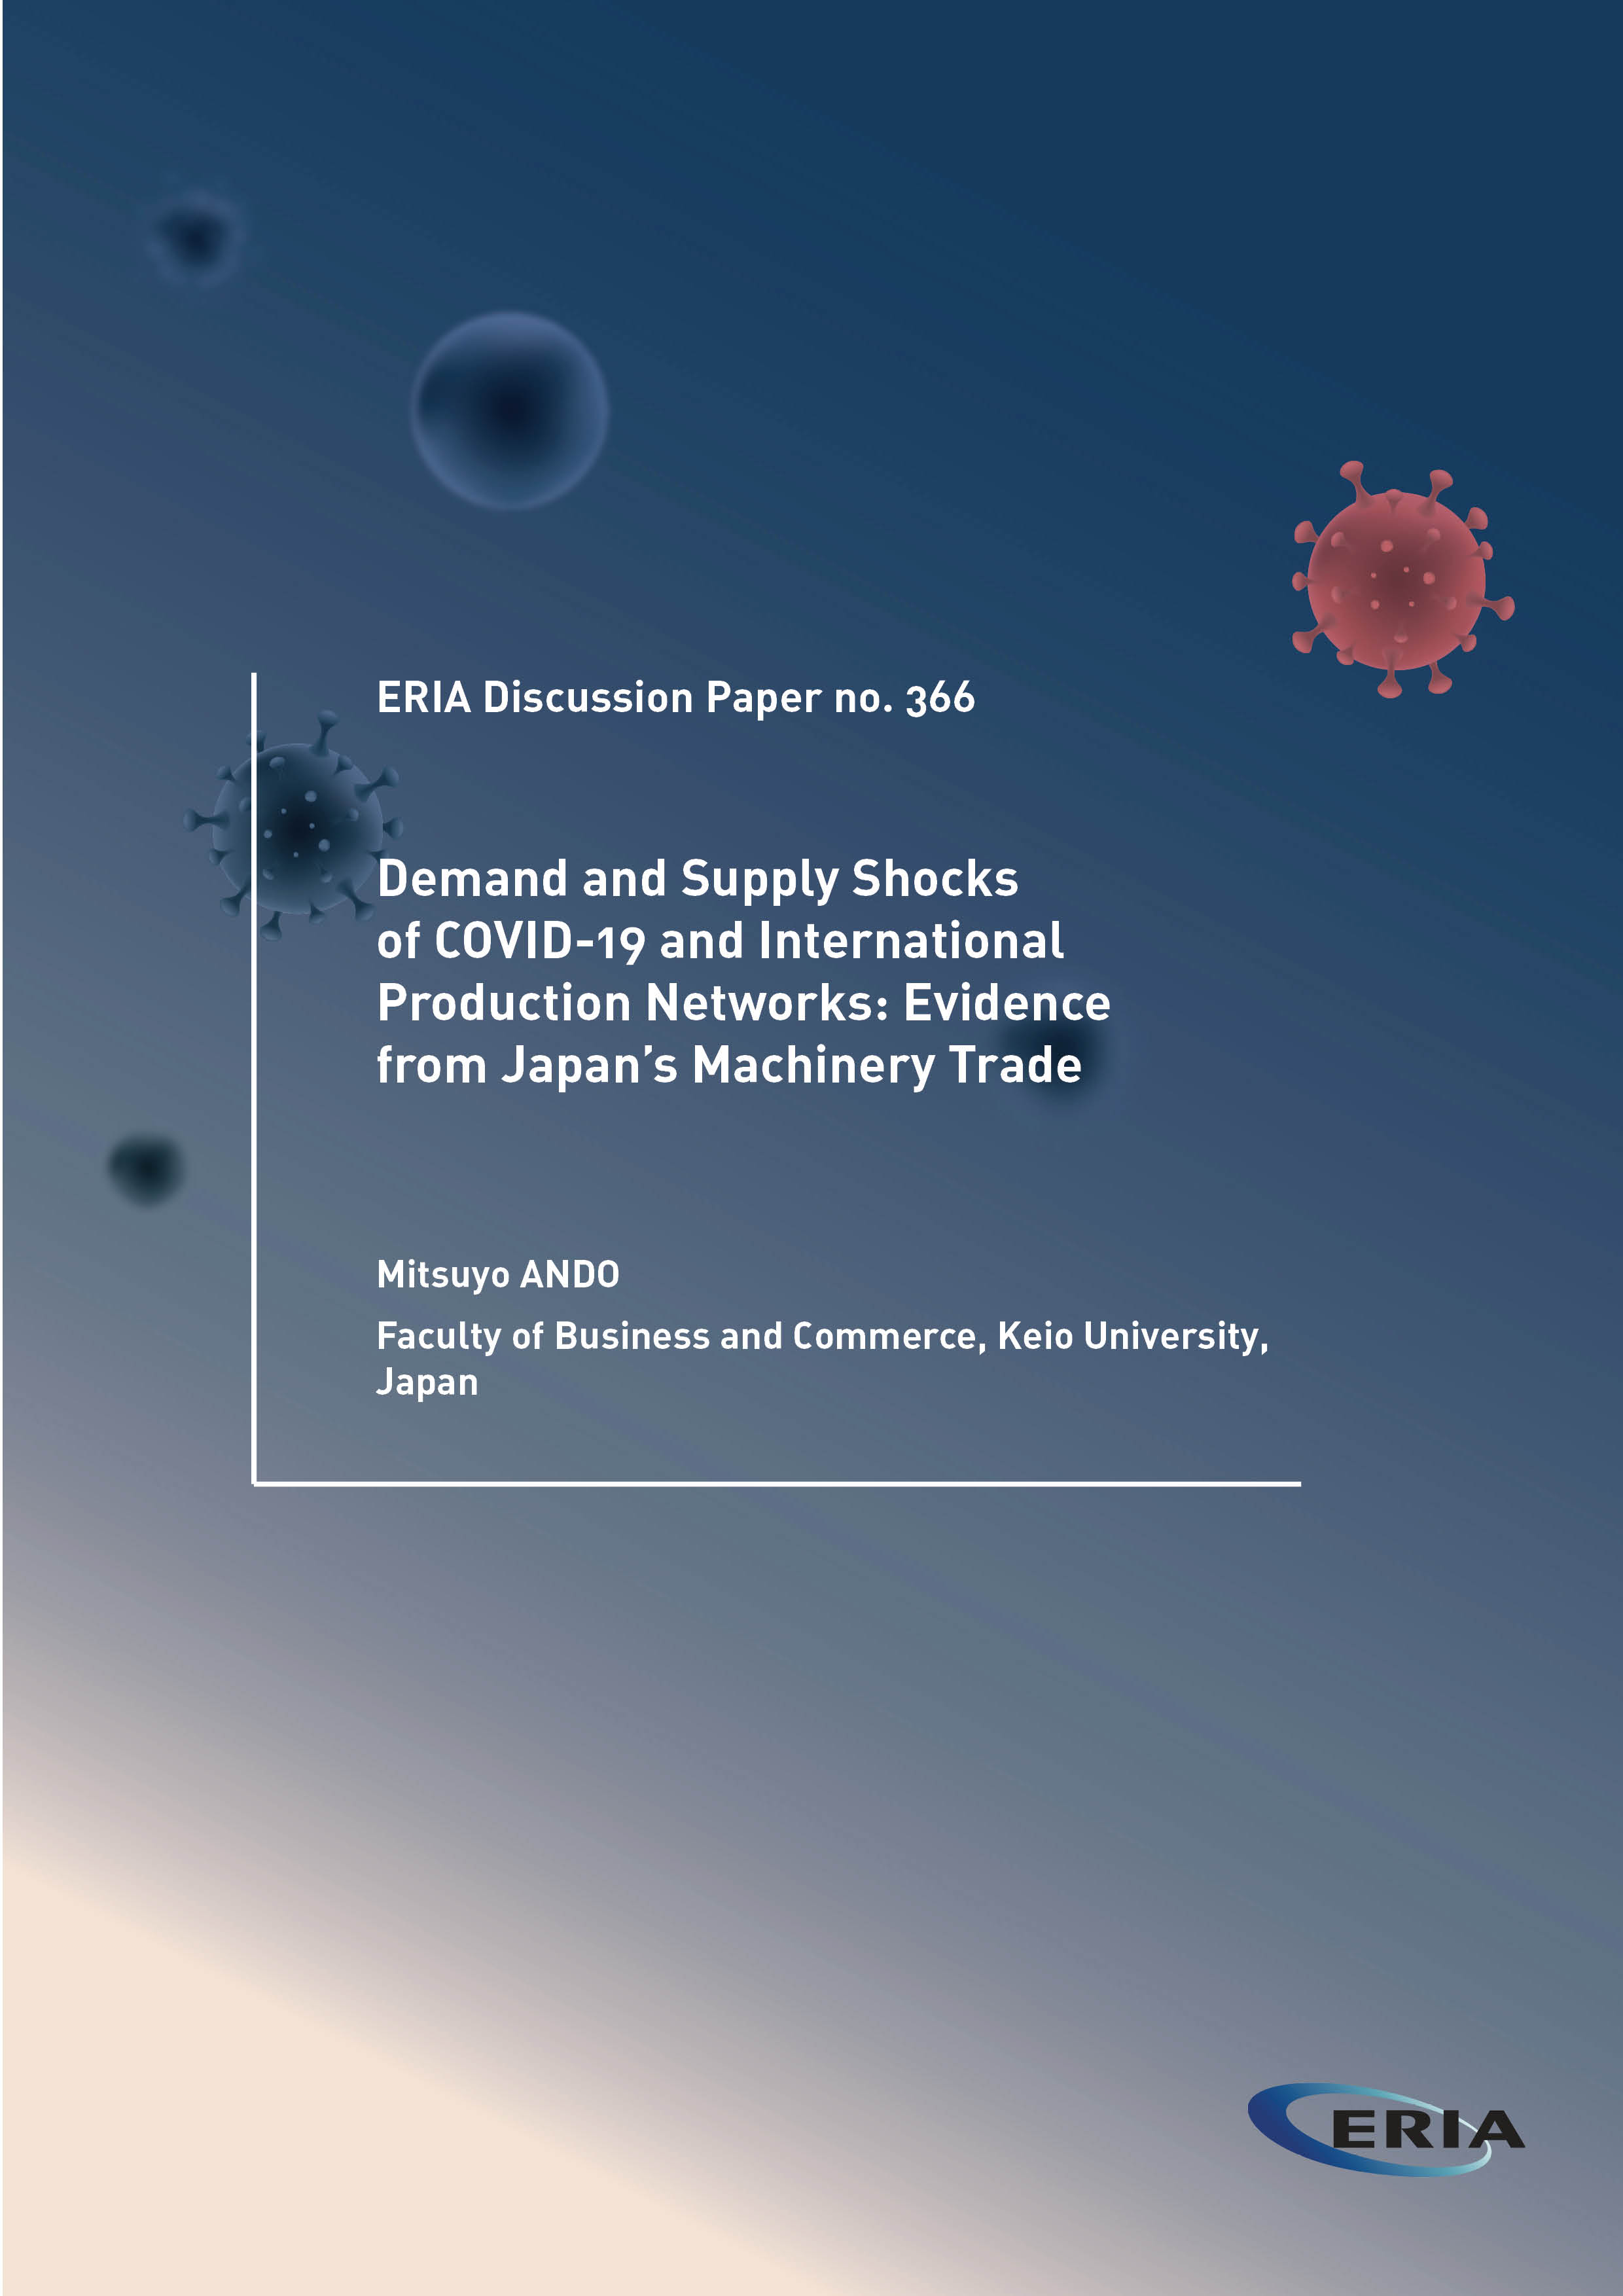 Demand and Supply Shocks of COVID-19 and International Production Networks: Evidence from Japan’s Machinery Trade